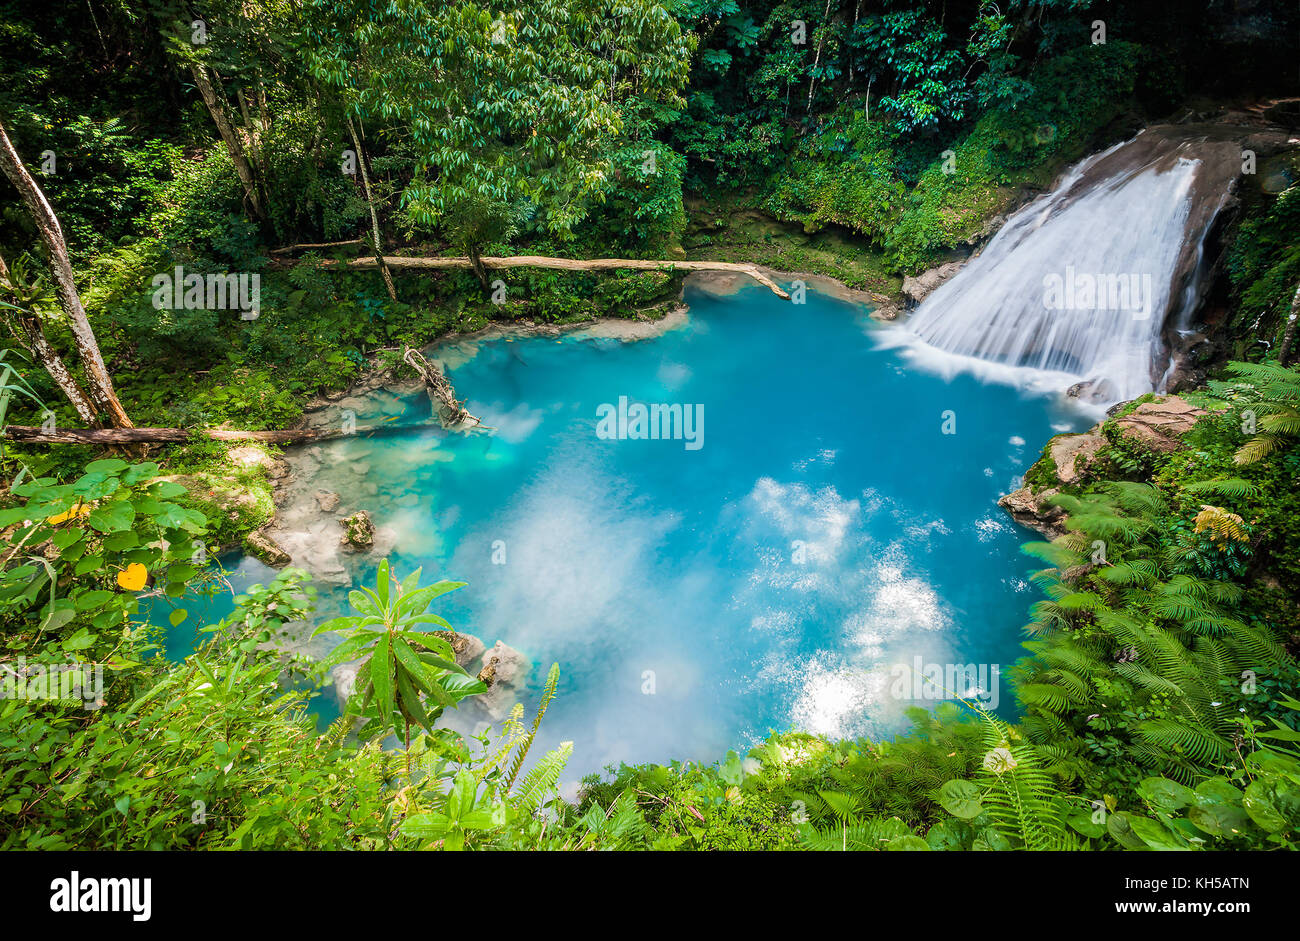 Blue hole waterfall in Jamaica Stock Photo